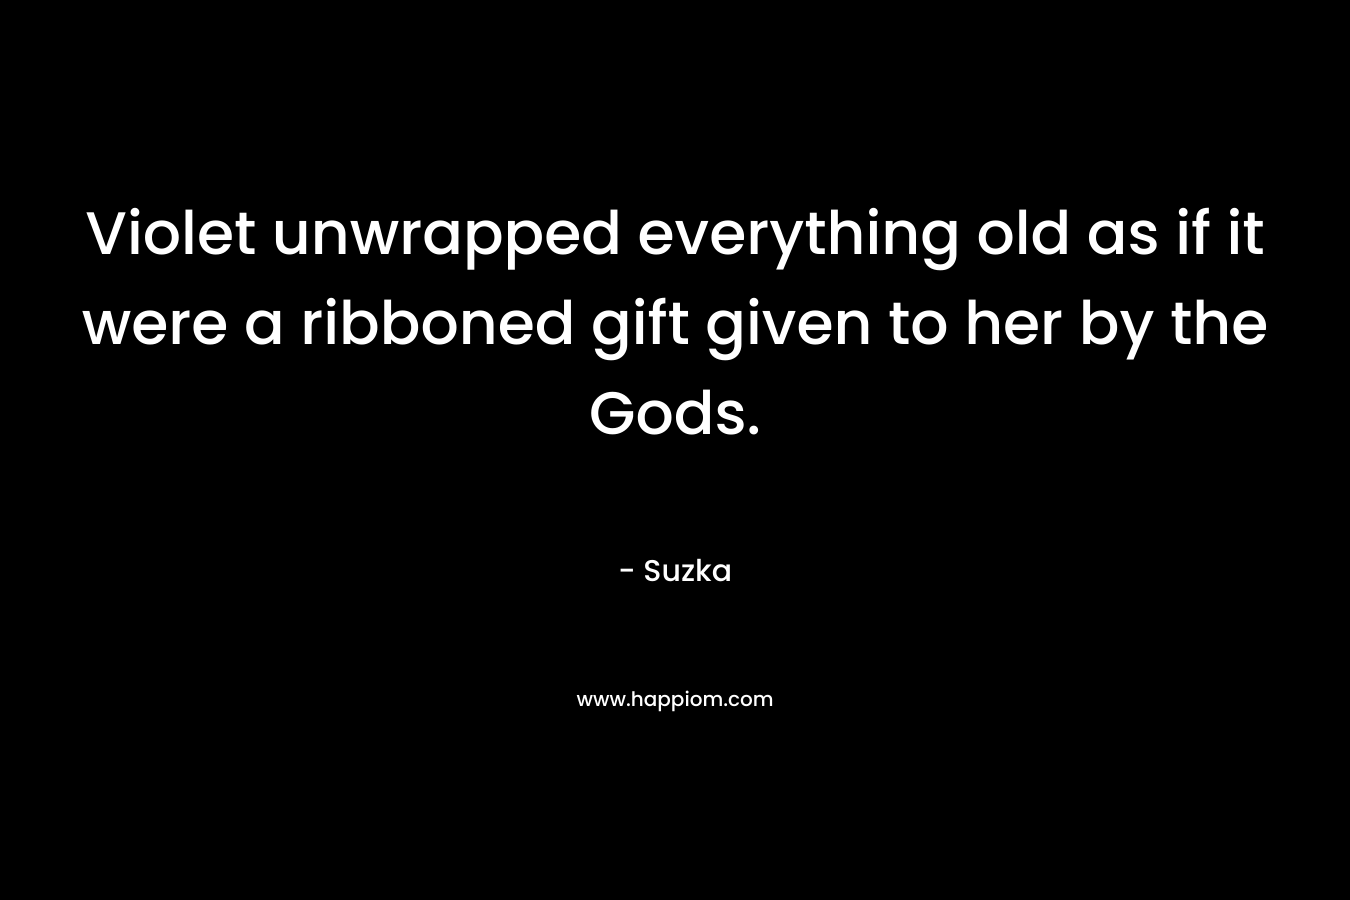 Violet unwrapped everything old as if it were a ribboned gift given to her by the Gods. – Suzka